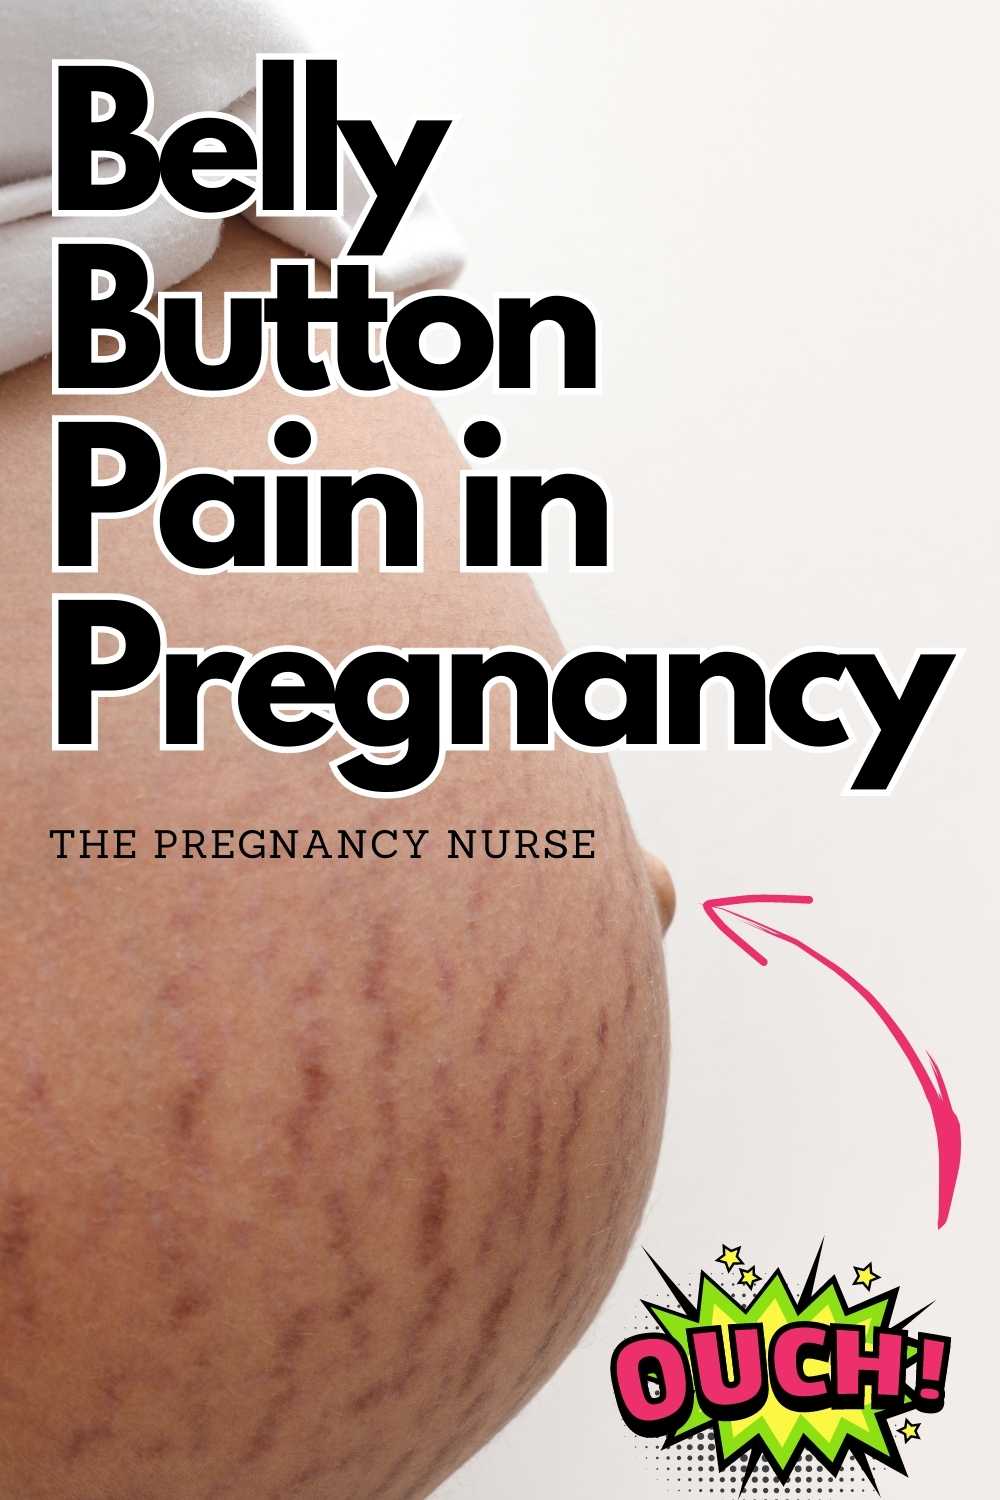 If you have an outie belly button or an innie you can still get belly button pain during pregnancy -- what does it mean, what causes it, and when do you need to get checked out?